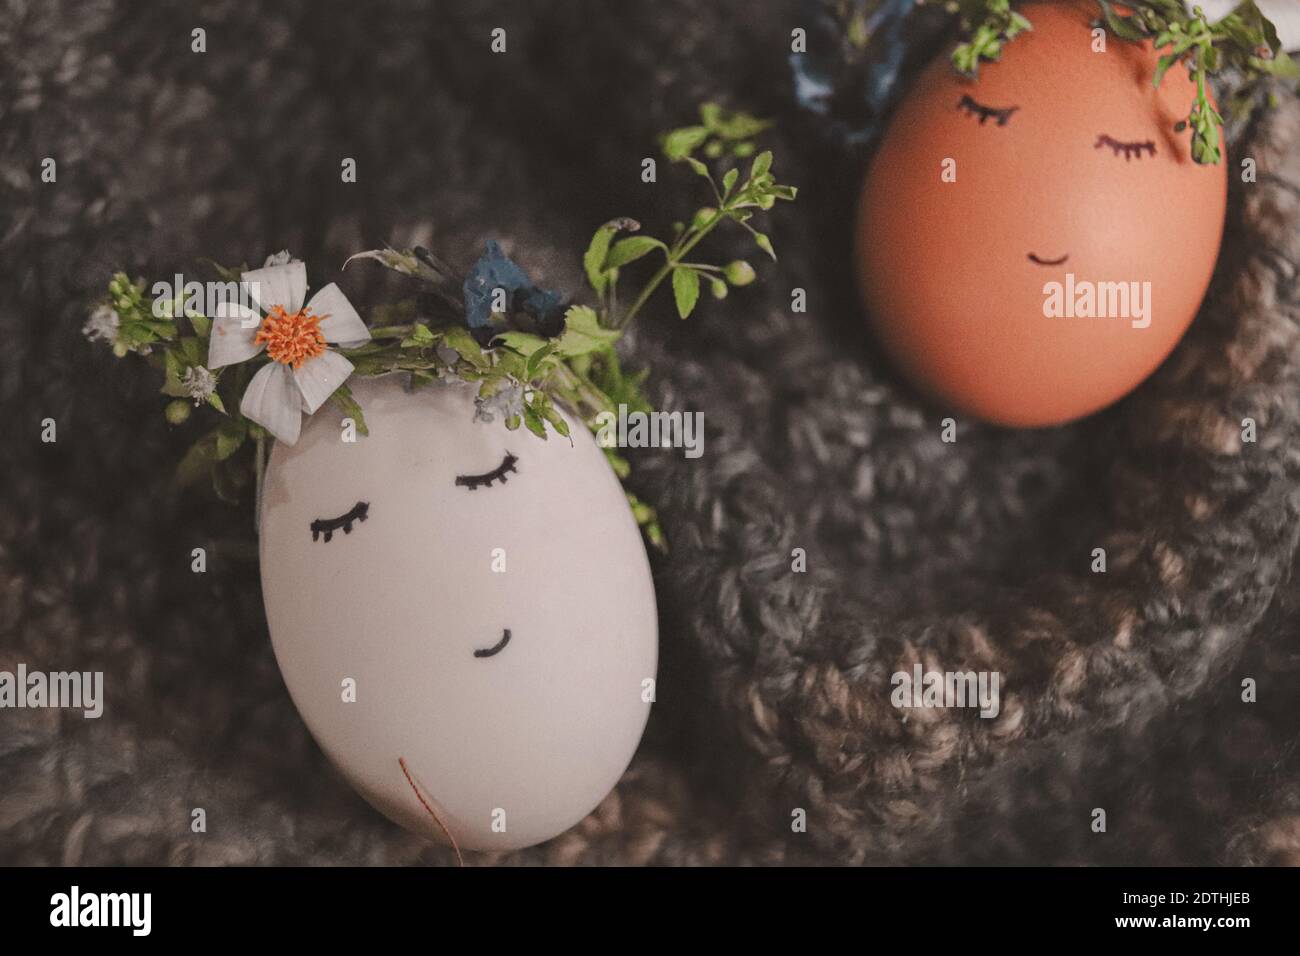 Cute eggs wearing flower crowns with drawn faces as decoration for Easter and the coming of Spring Stock Photo